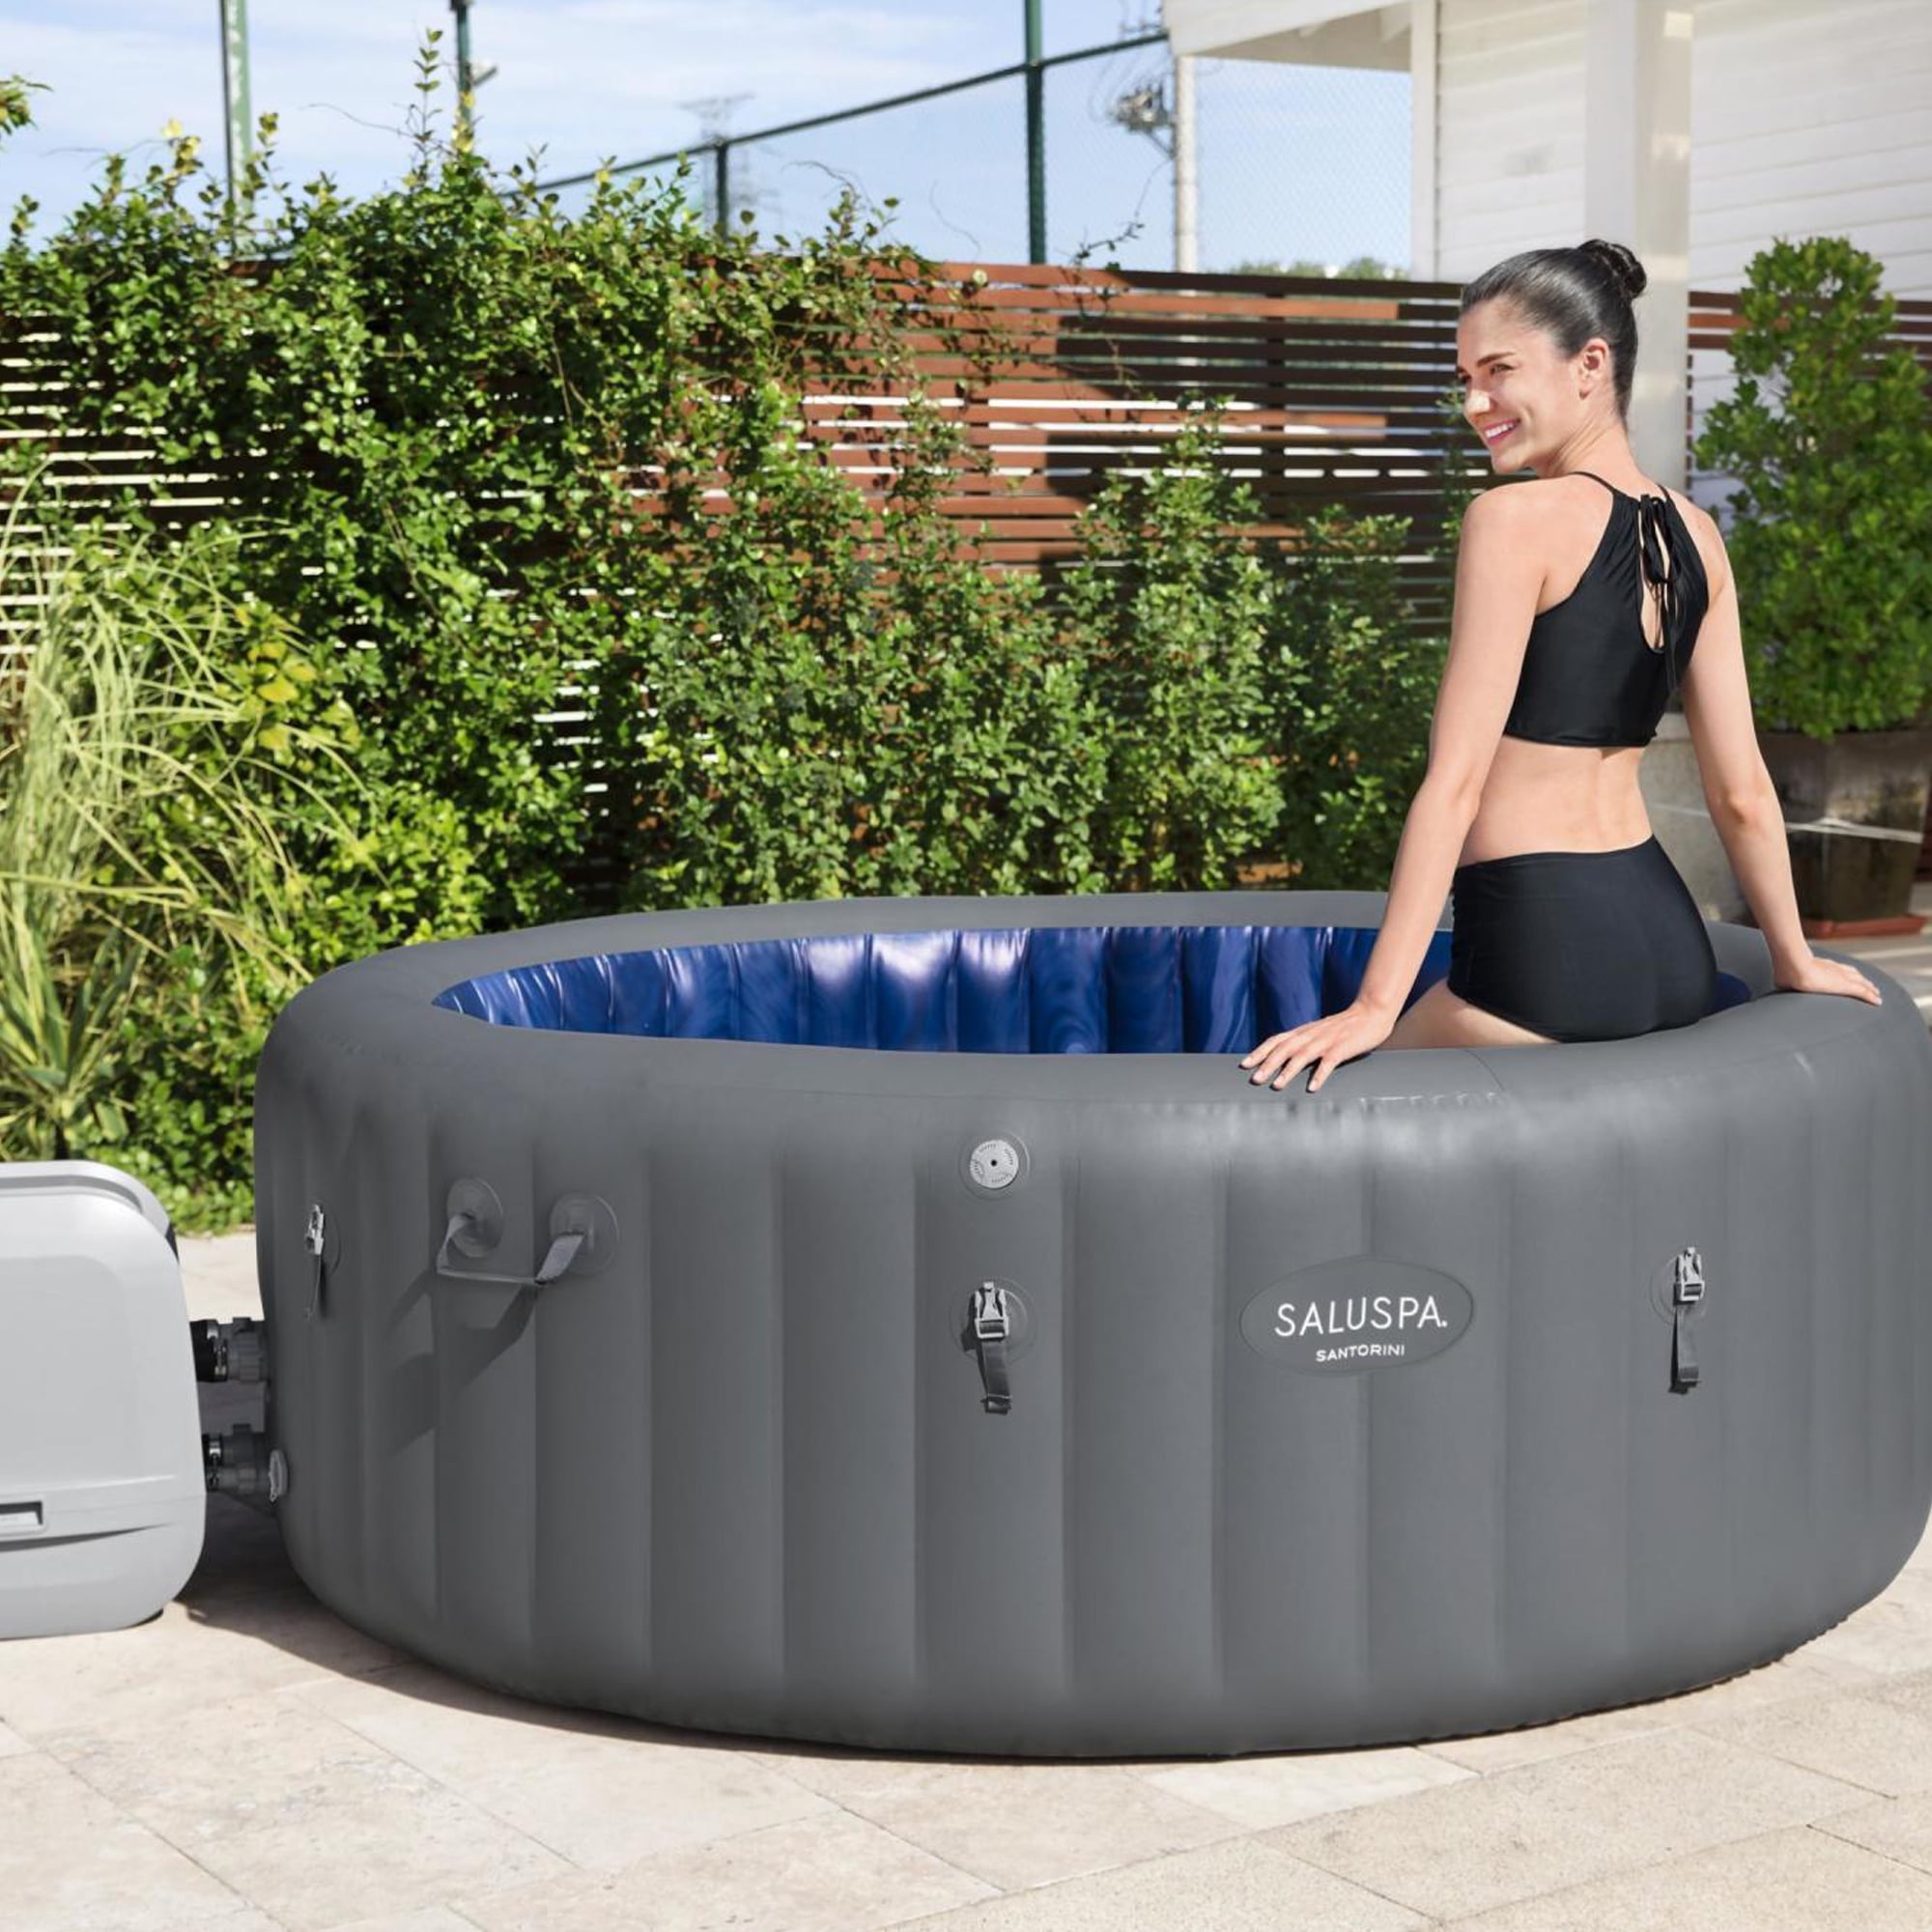 Gray Hot Bestway 180 with Santorini Inflatable HydroJet SaluSpa Tub Jets,